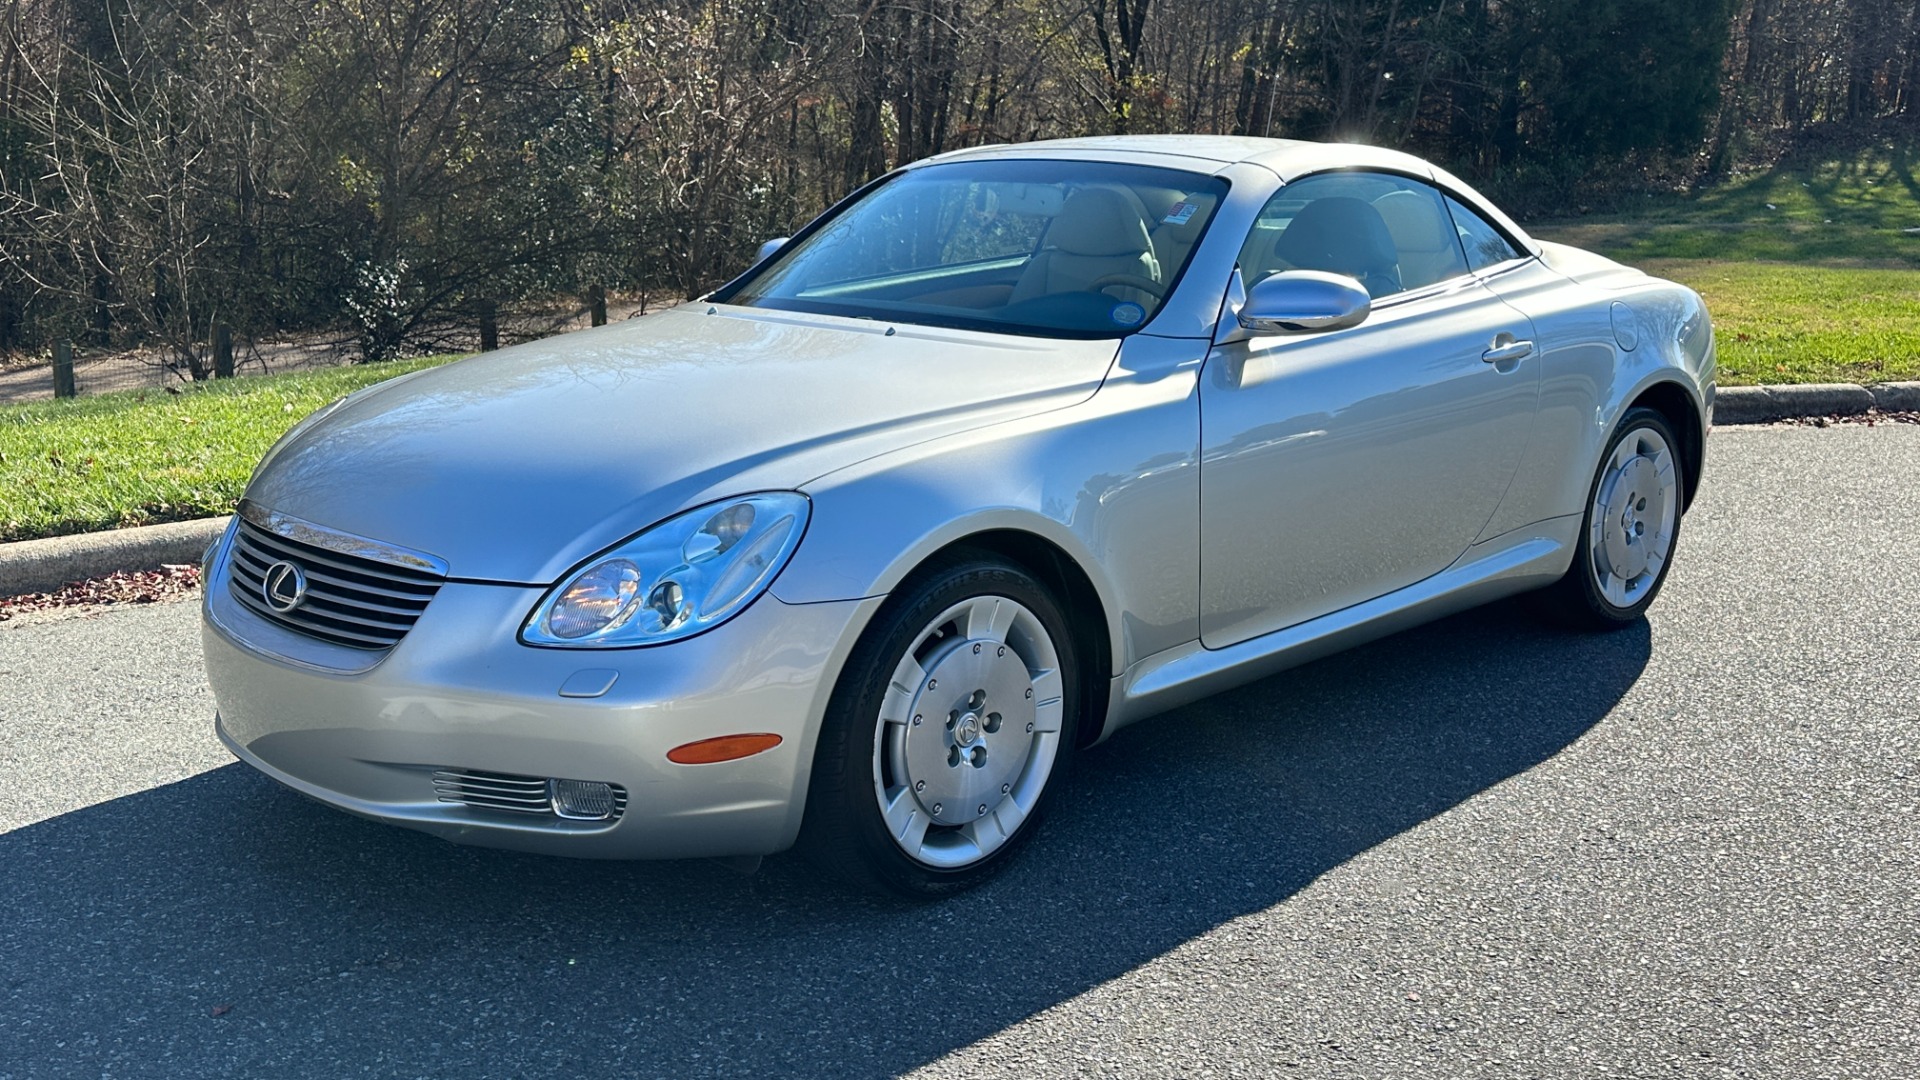 Used 2003 Lexus SC 430 HARD TOP CONVERTIBLE / TAN LEATHER INTERIOR / LOW MILES / 4.3L V8 ENGINE for sale $23,995 at Formula Imports in Charlotte NC 28227 5